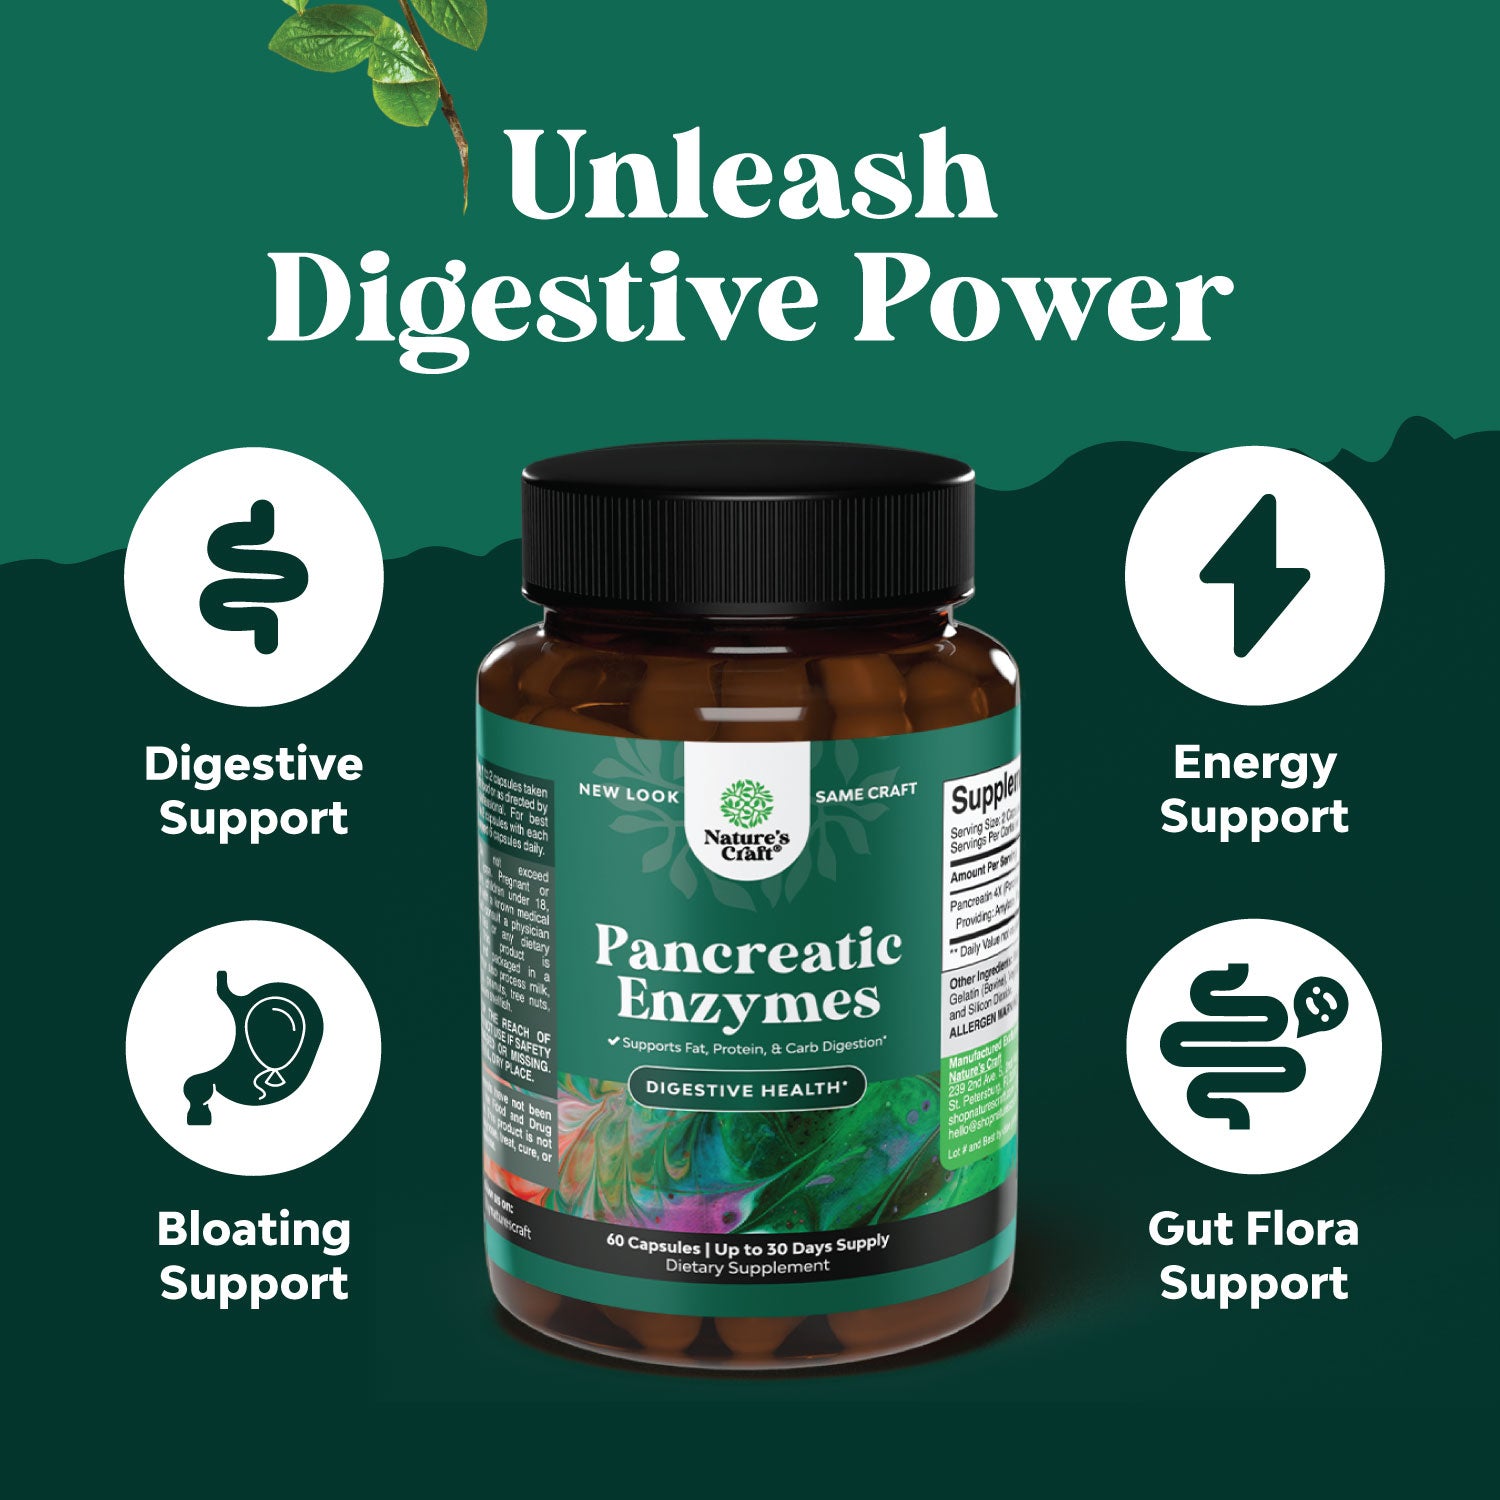 Pancreatic Enzymes - 60 Capsules - Nature's Craft